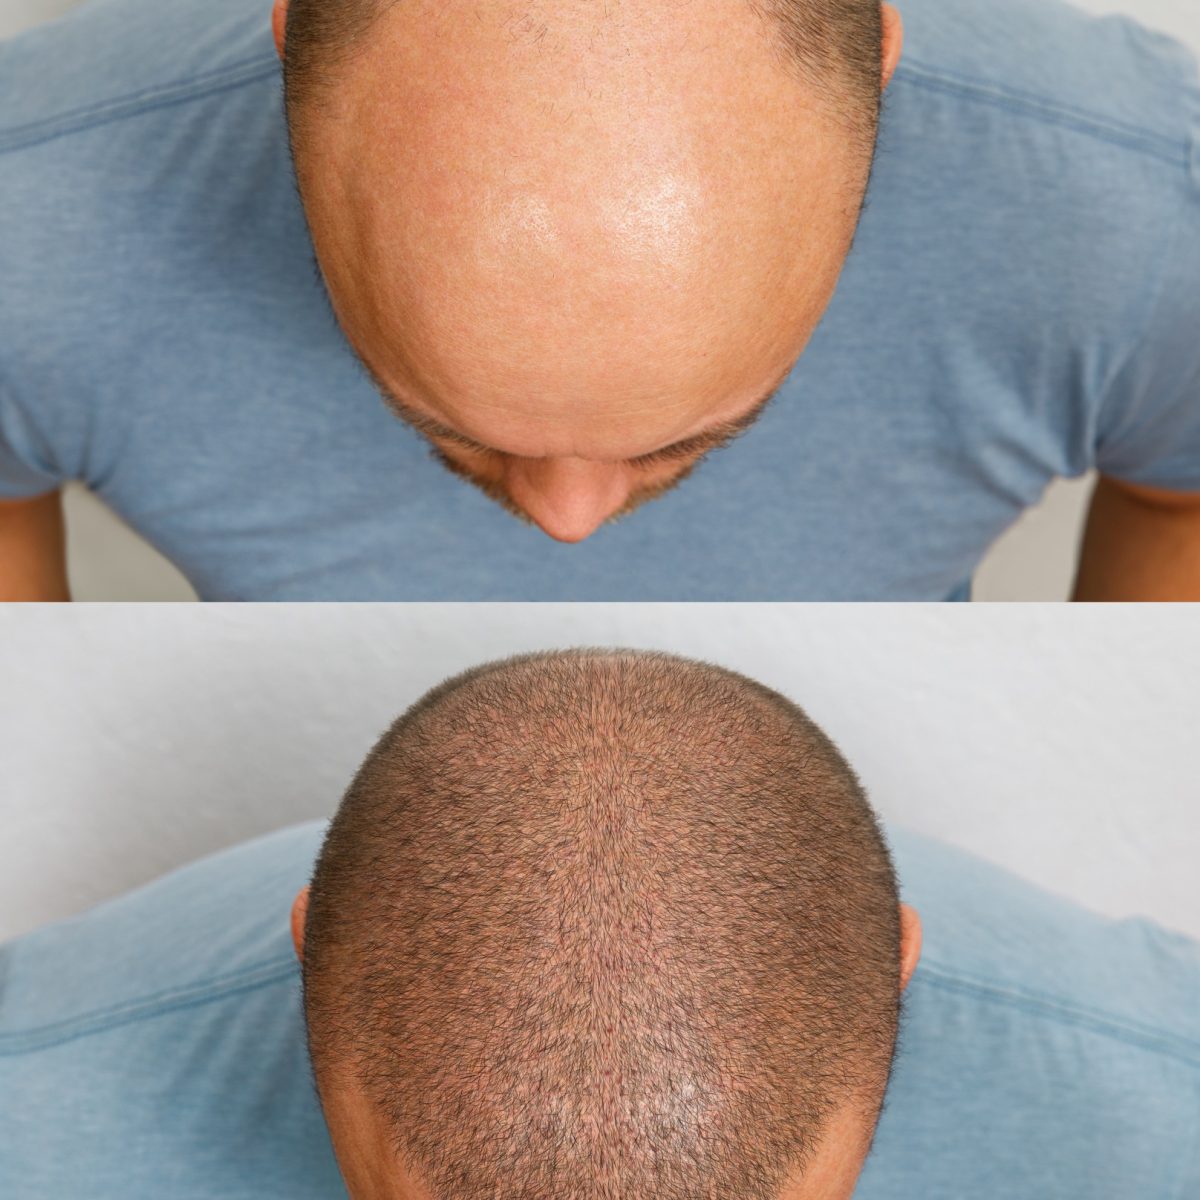 The head of a balding man before and after hair transplant surgery. A man losing his hair has become shaggy. An advertising poster for a hair transplant clinic. Treatment of baldness